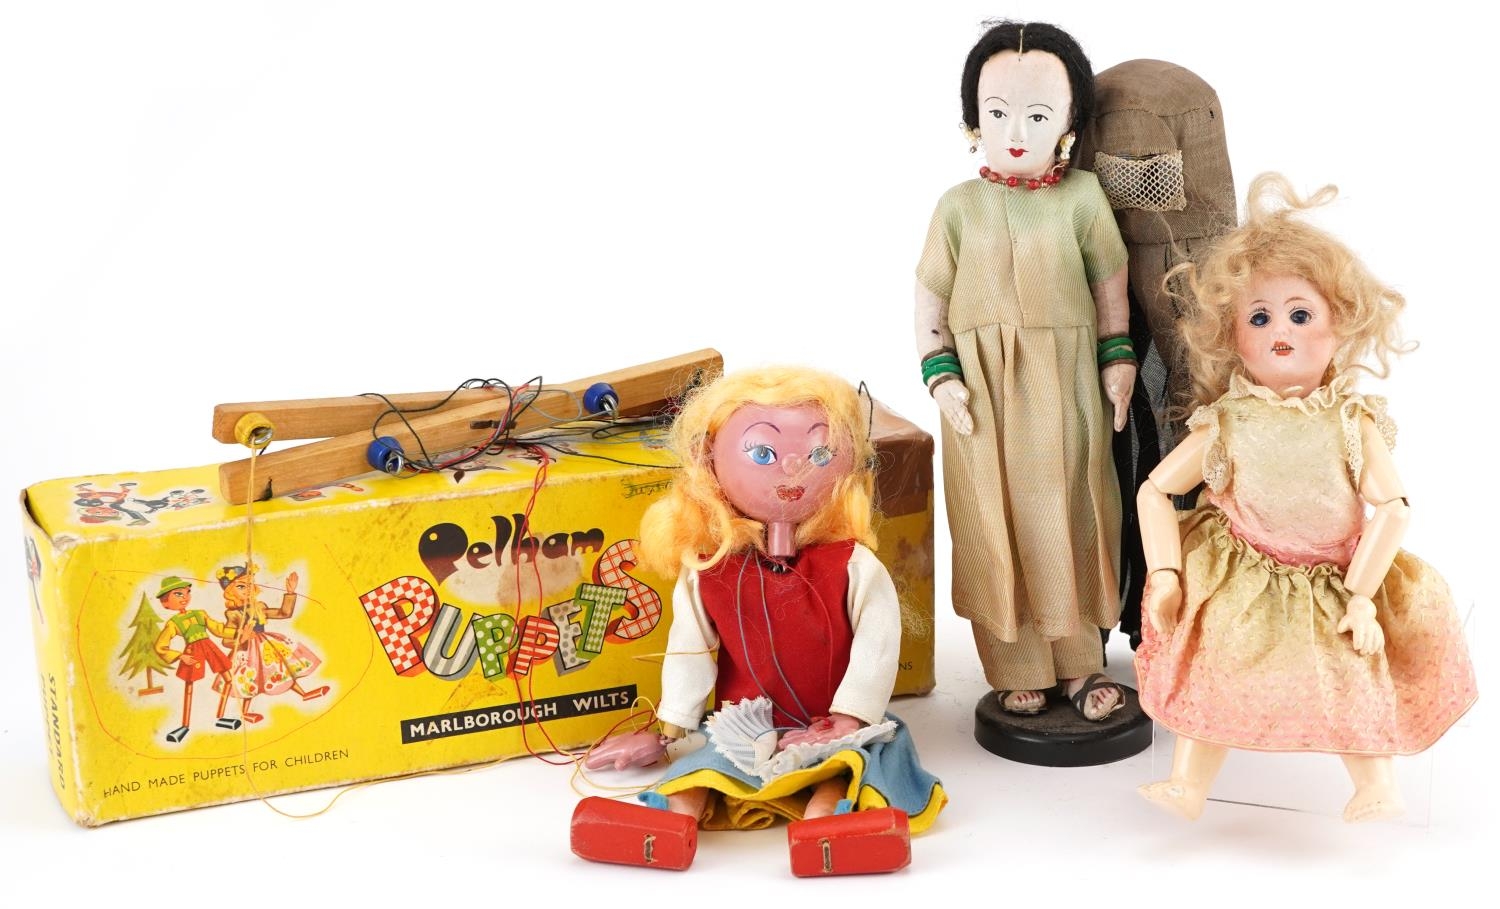 Vintage toys including a bisque headed doll with jointed limbs and a Goldilocks Pelham puppet with - Image 2 of 5